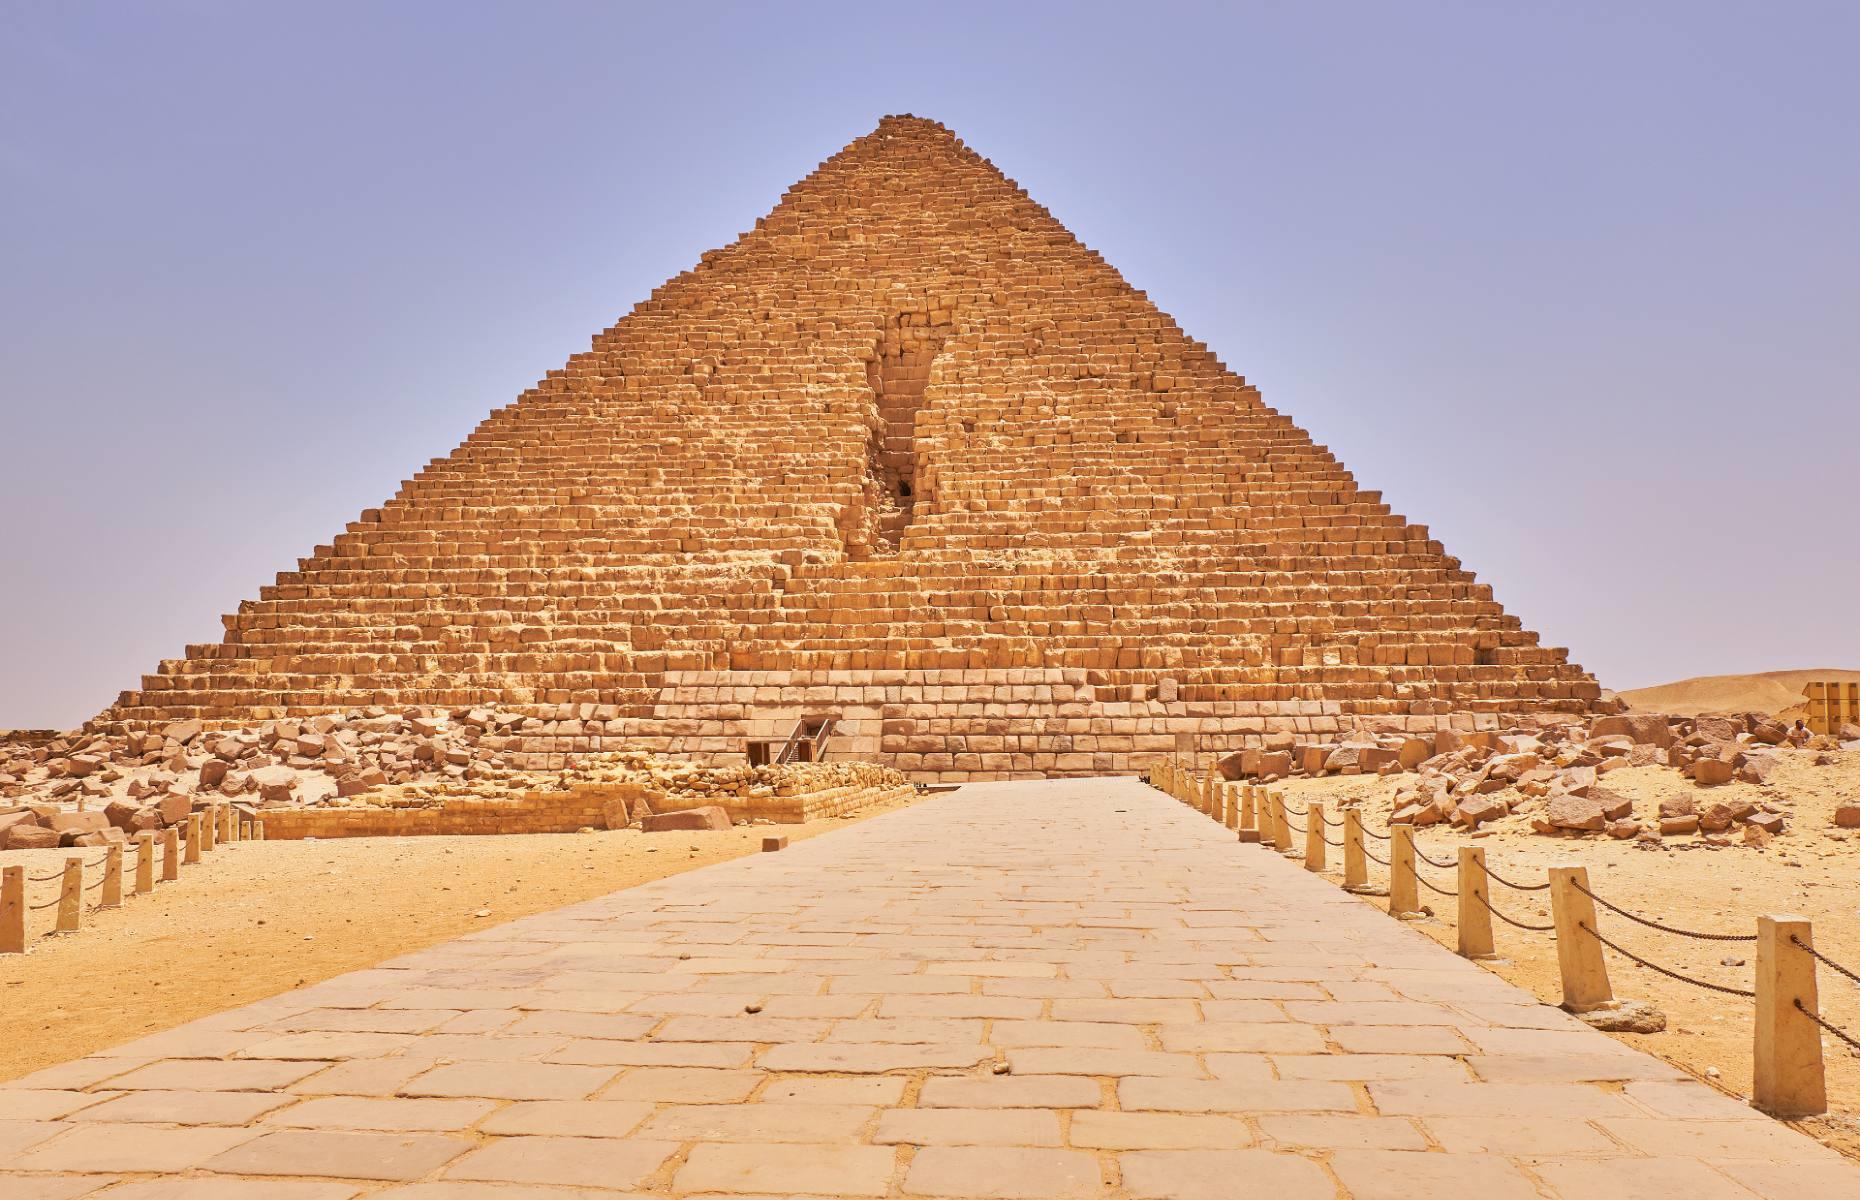 <p>Menkaure Pyramid is the last and smallest of the three Great Pyramids of Giza, standing at just 213 feet (65m) tall. Completed in the 26th century BC, it was built for King Menkaure, and sits on the same plateau as the pyramids of his father (Khafre) and grandfather (Khufu).</p>